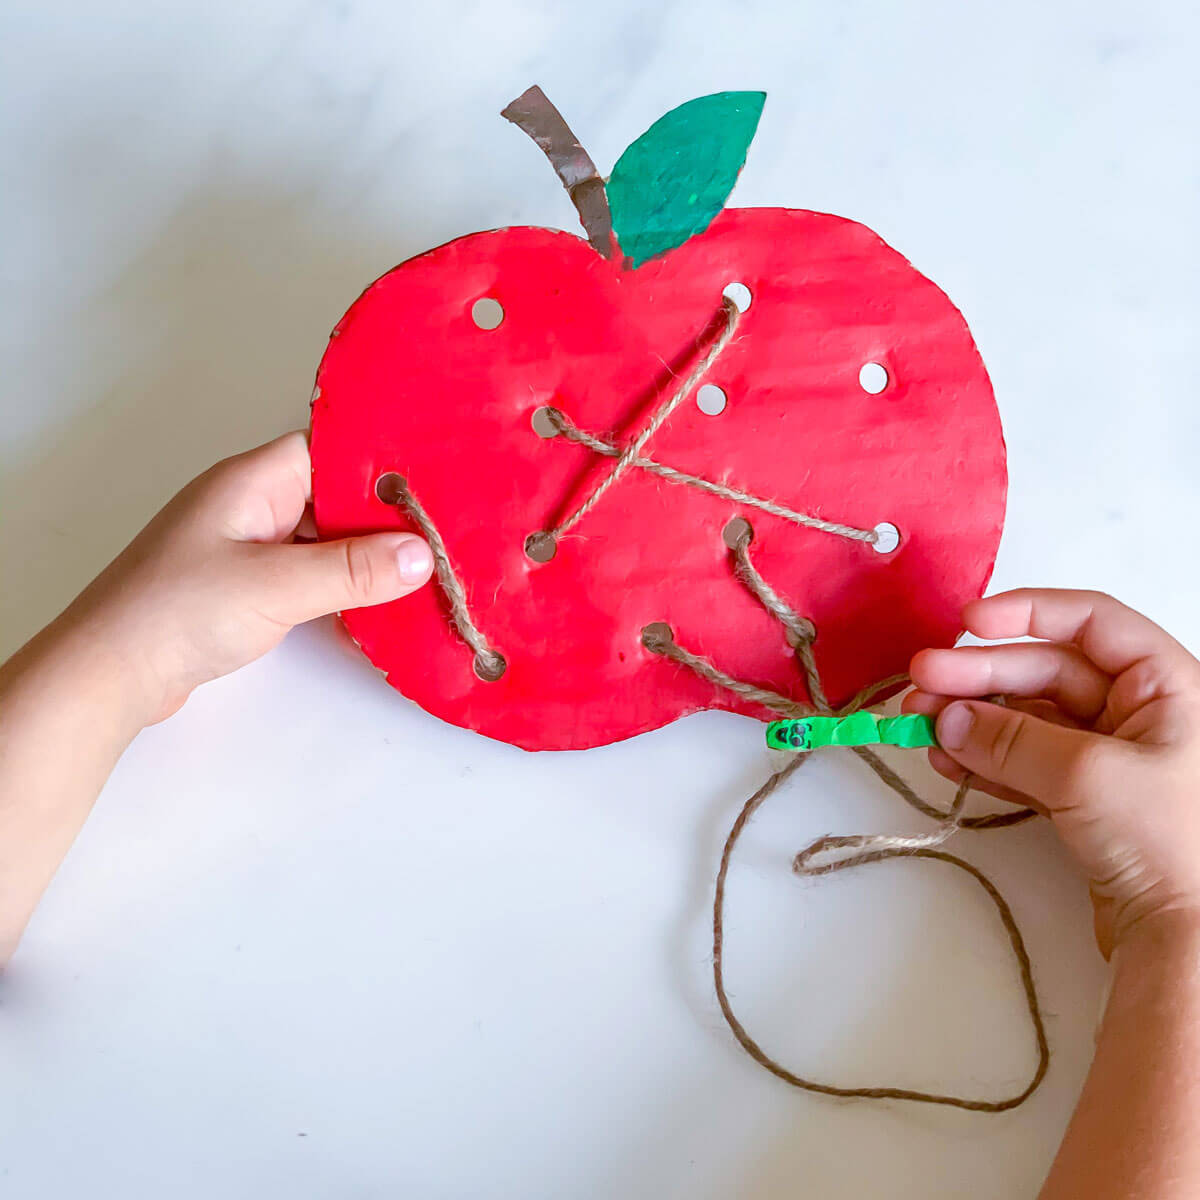 Lacing Activity – How to Make a Toy for Preschoolers